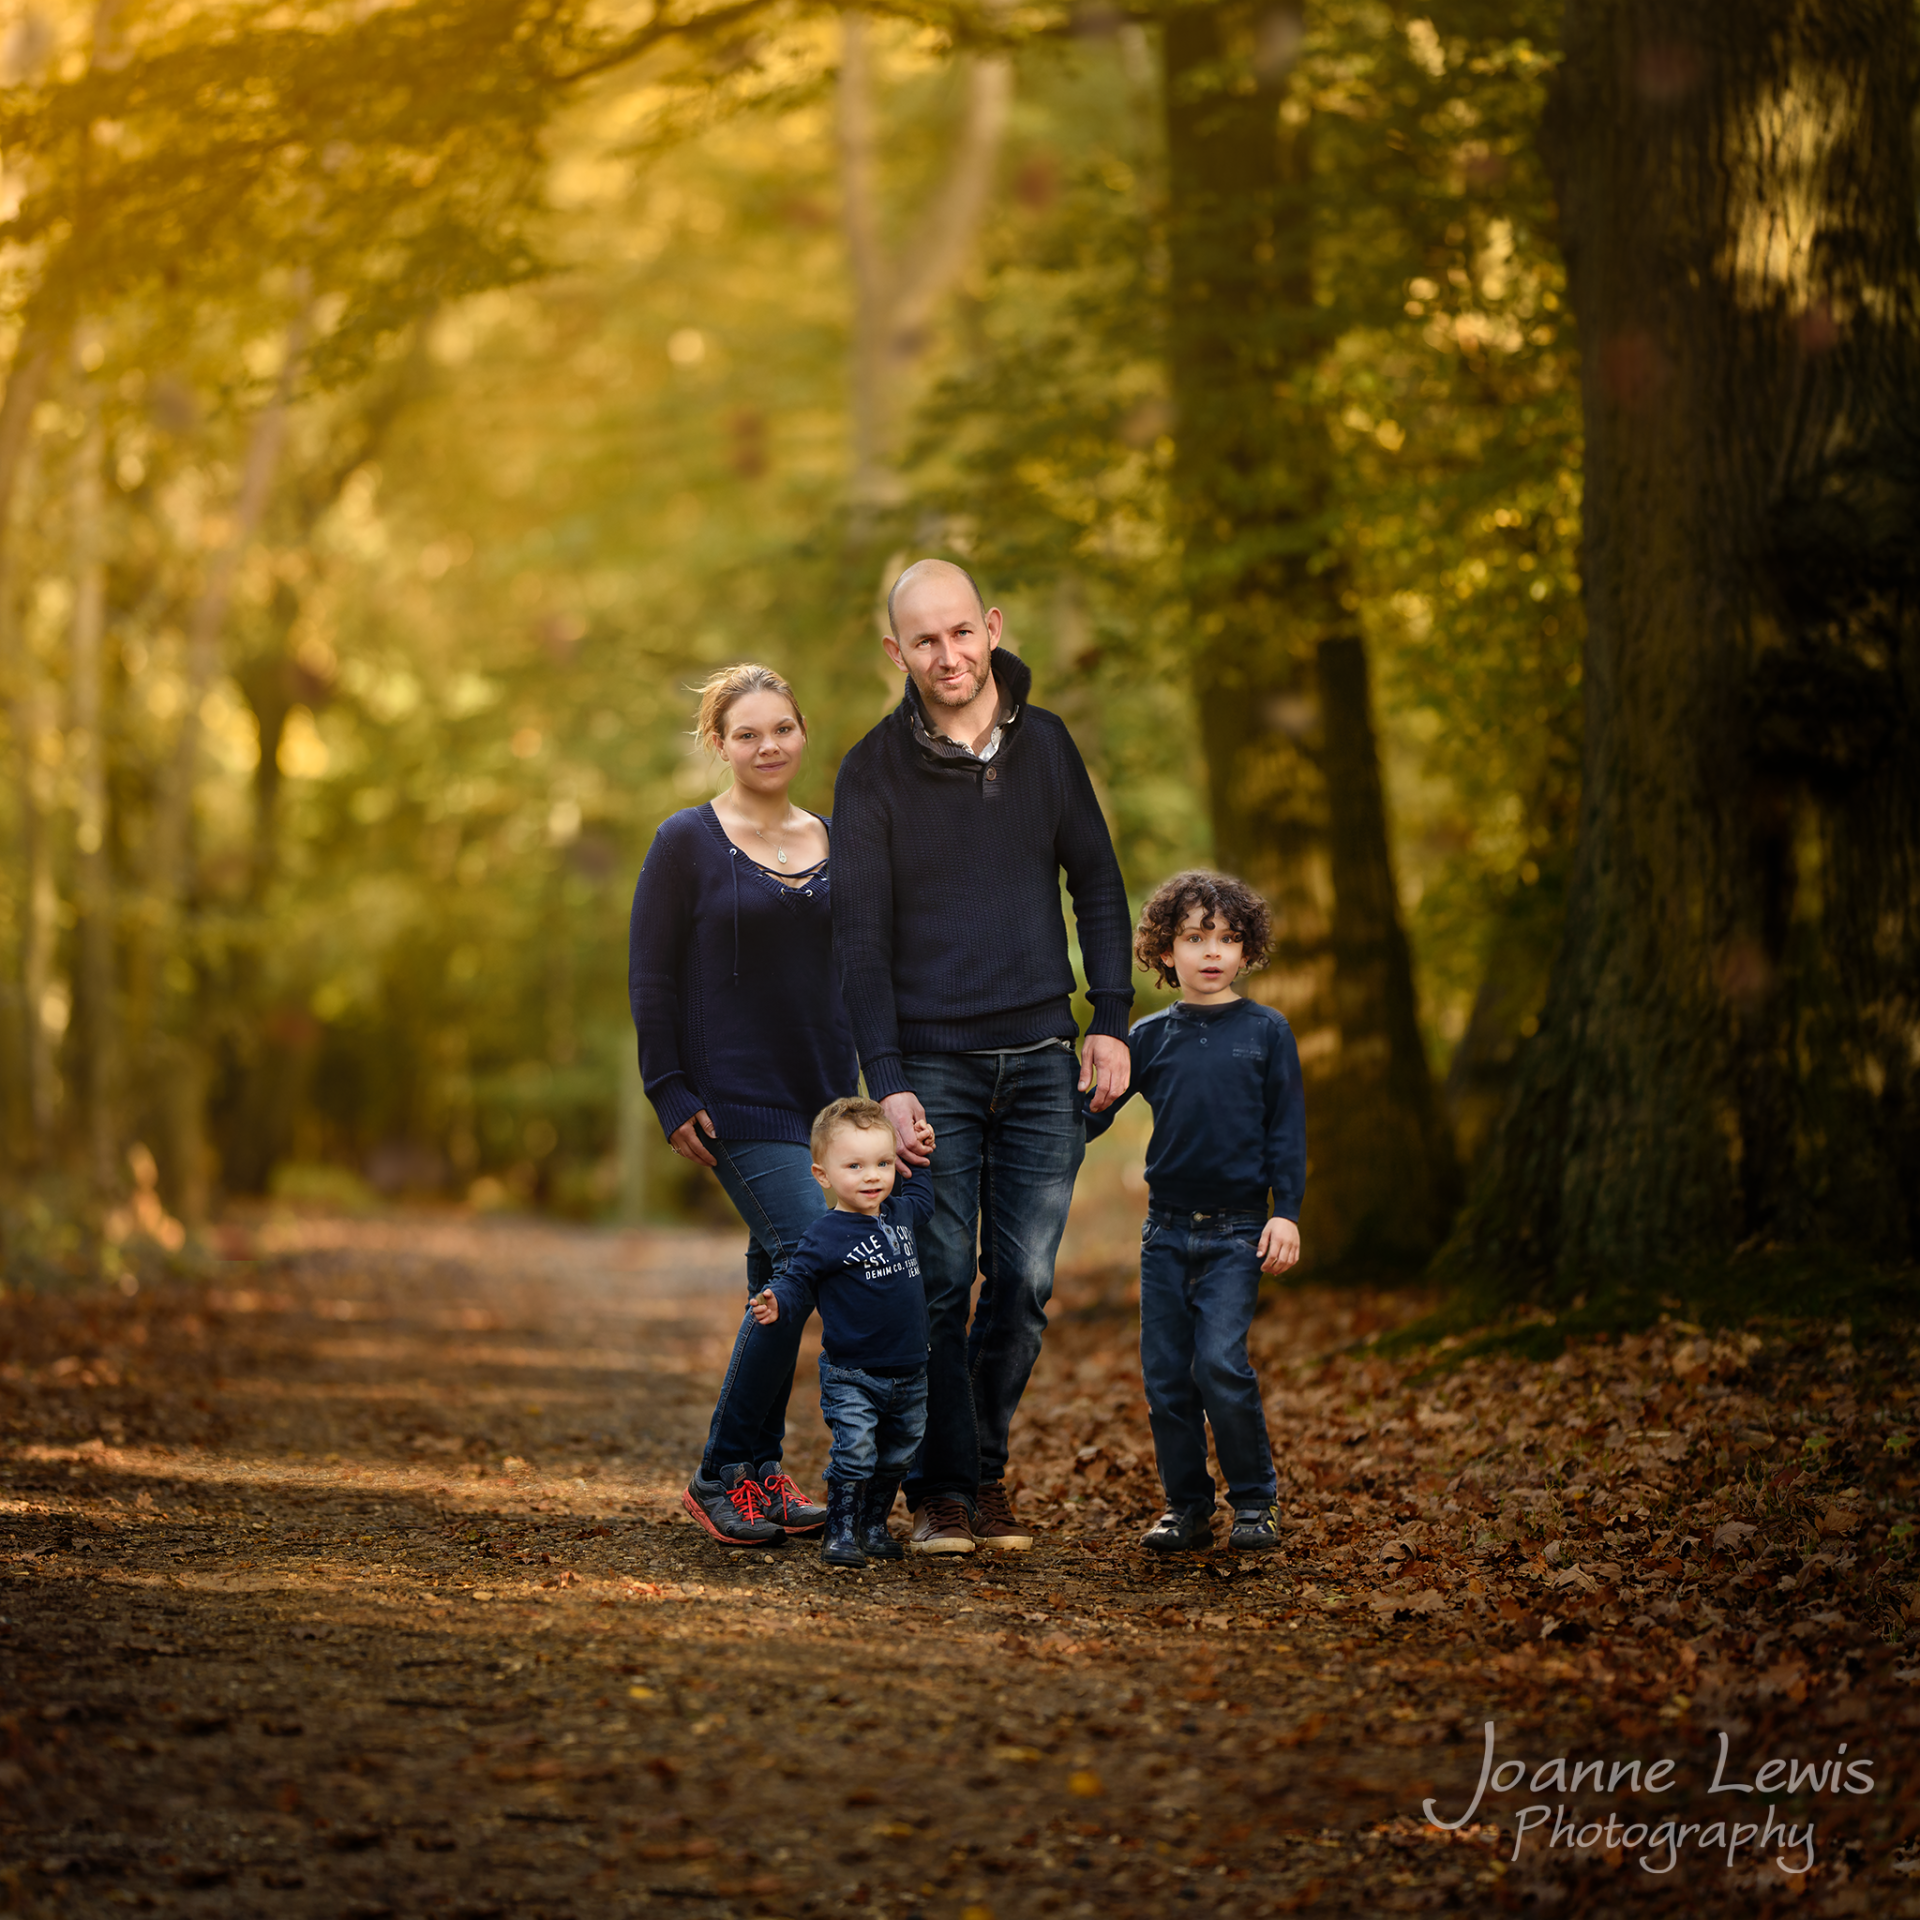 Family photographed by Joanne Lewis Photography on location in Essex